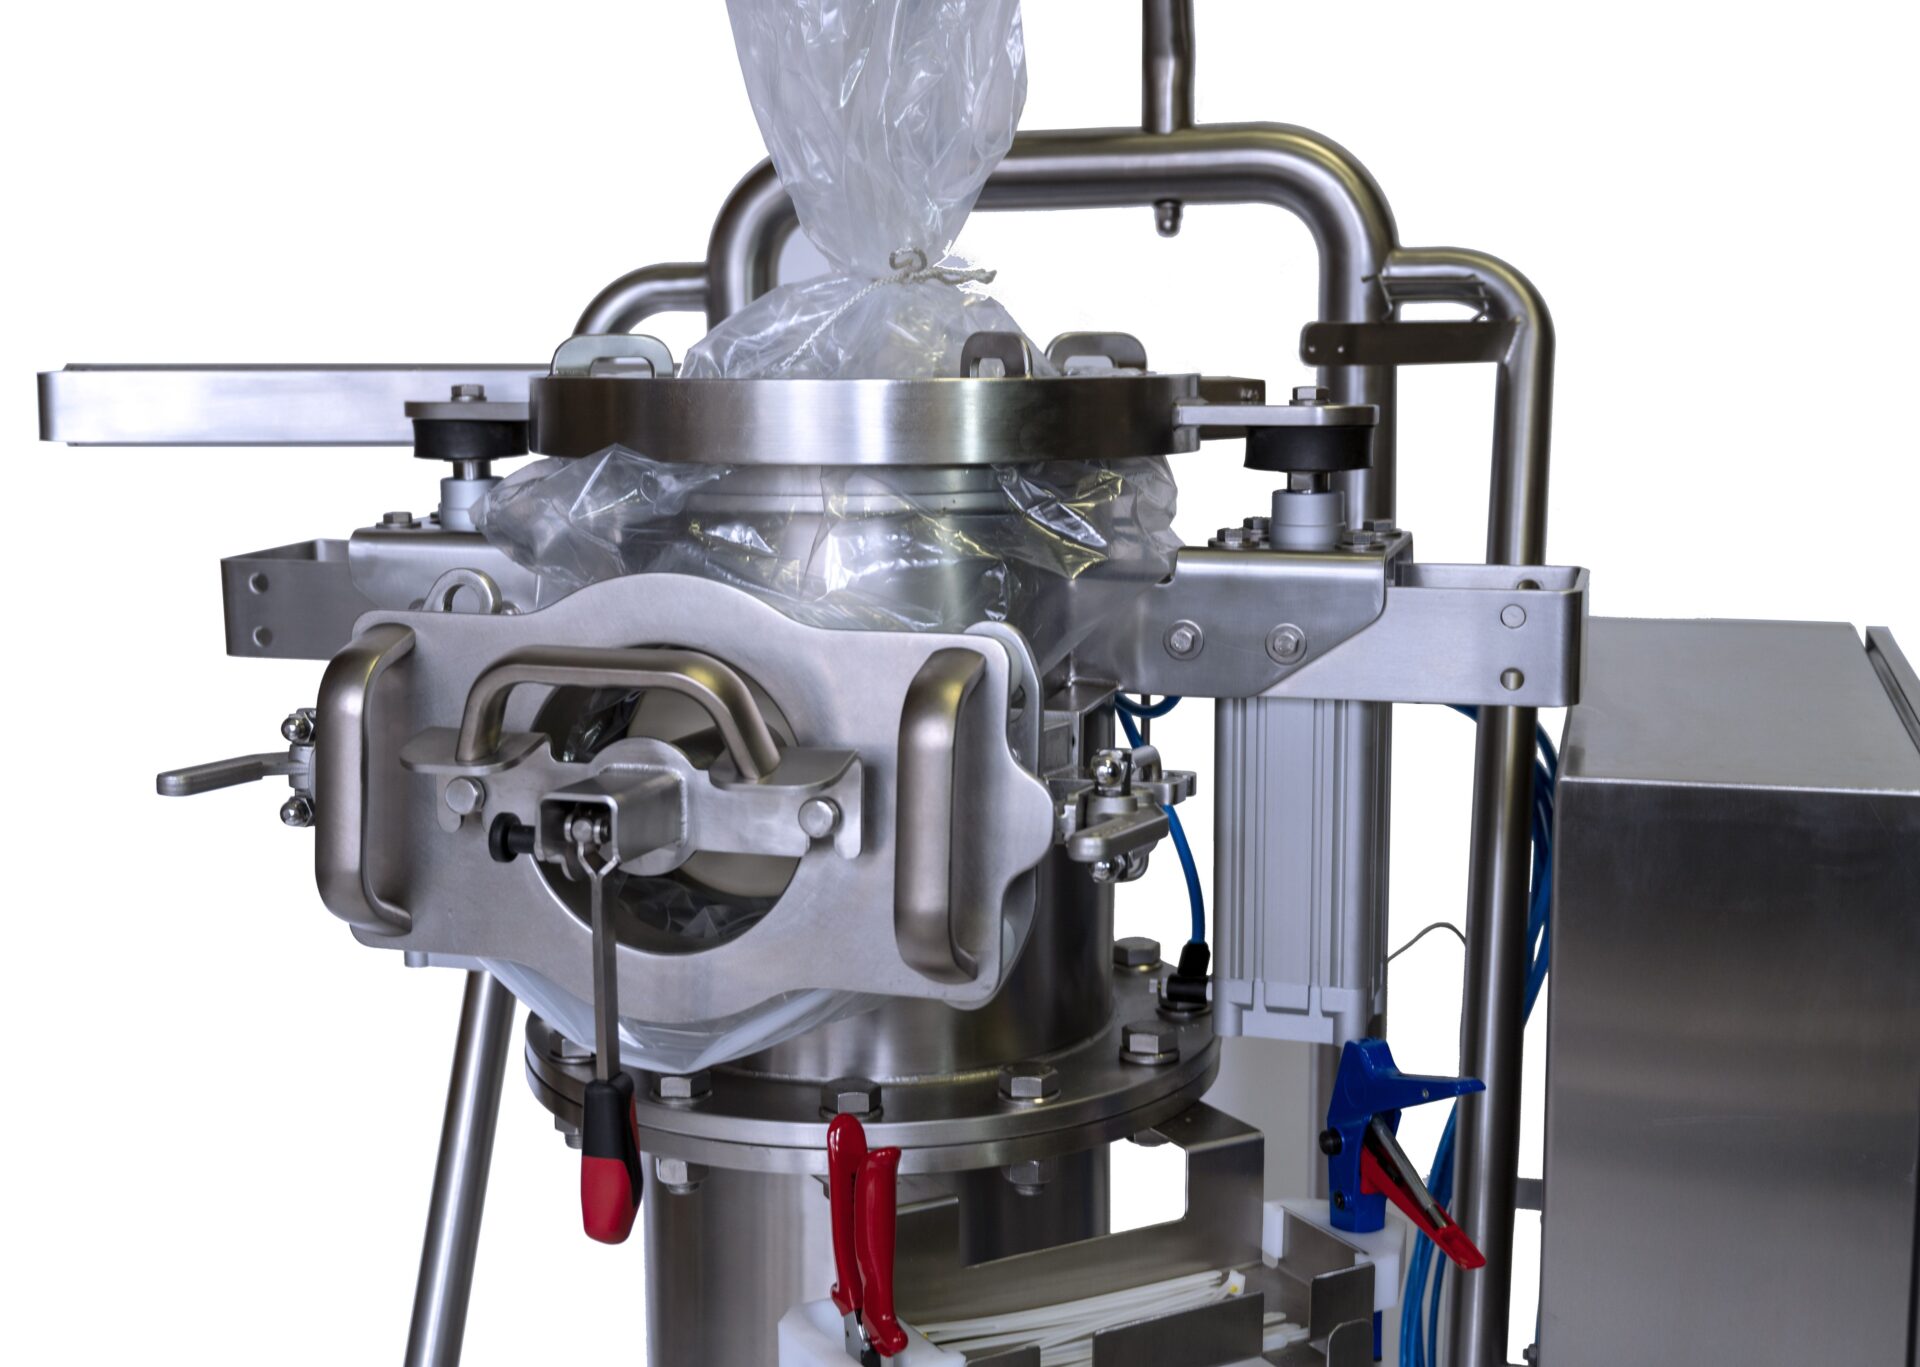 Close-up of the HECHT LAS-EC 'Easy' Liner Connection system, a sophisticated mechanism for discharging Big Bags, featuring secure handling and a simple operating process, designed for the safe and ergonomic release of powdered substances in industrial environments.